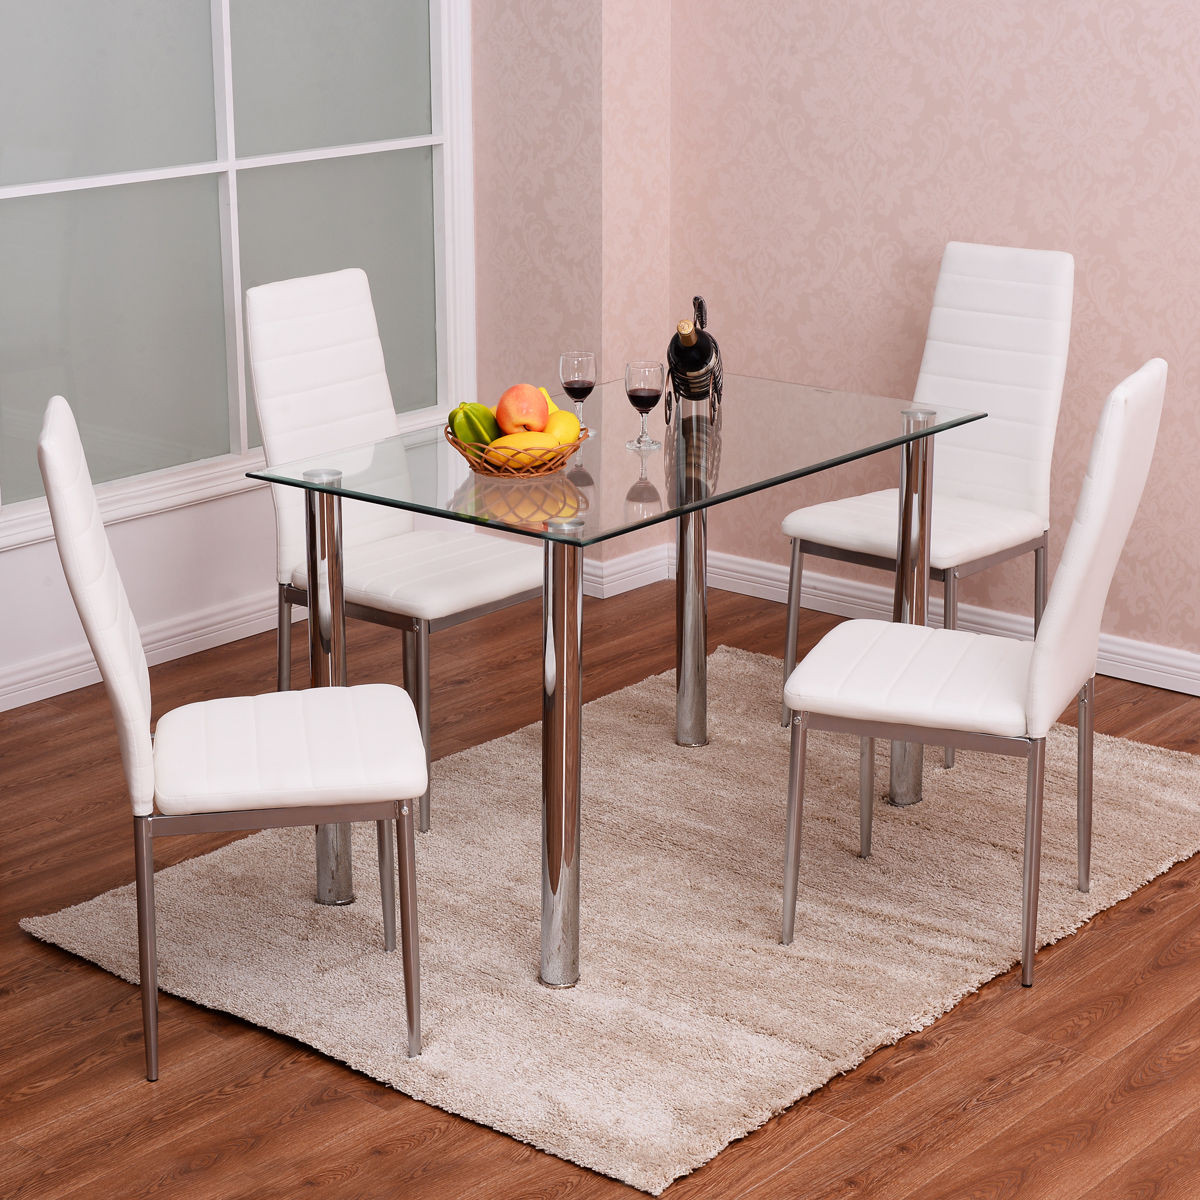 5 Pcs Dining Set With A Simple Design